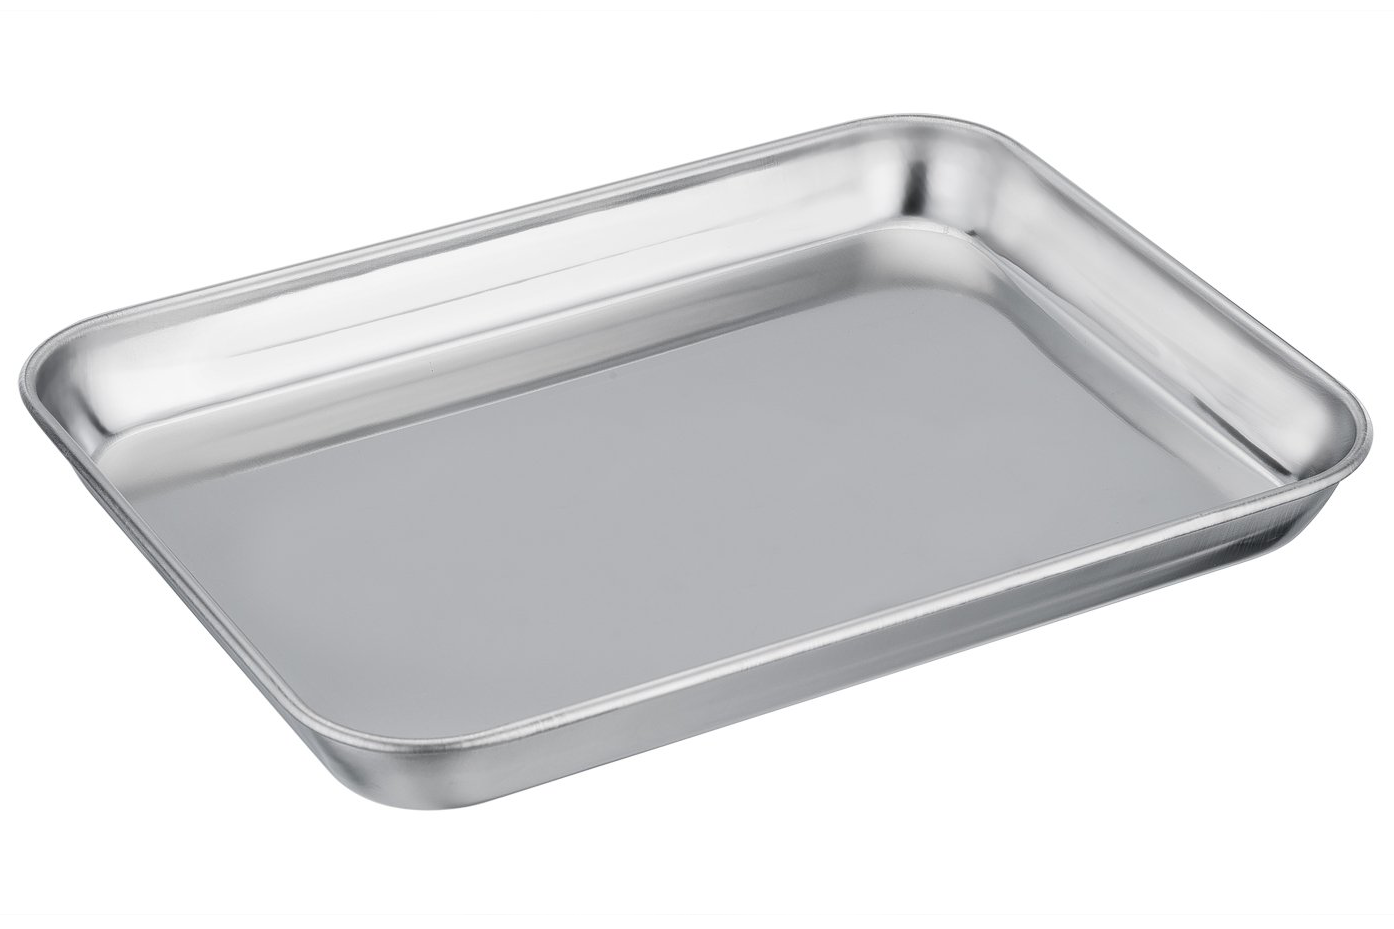 Stainless Steel Curing Tray - Uvitron